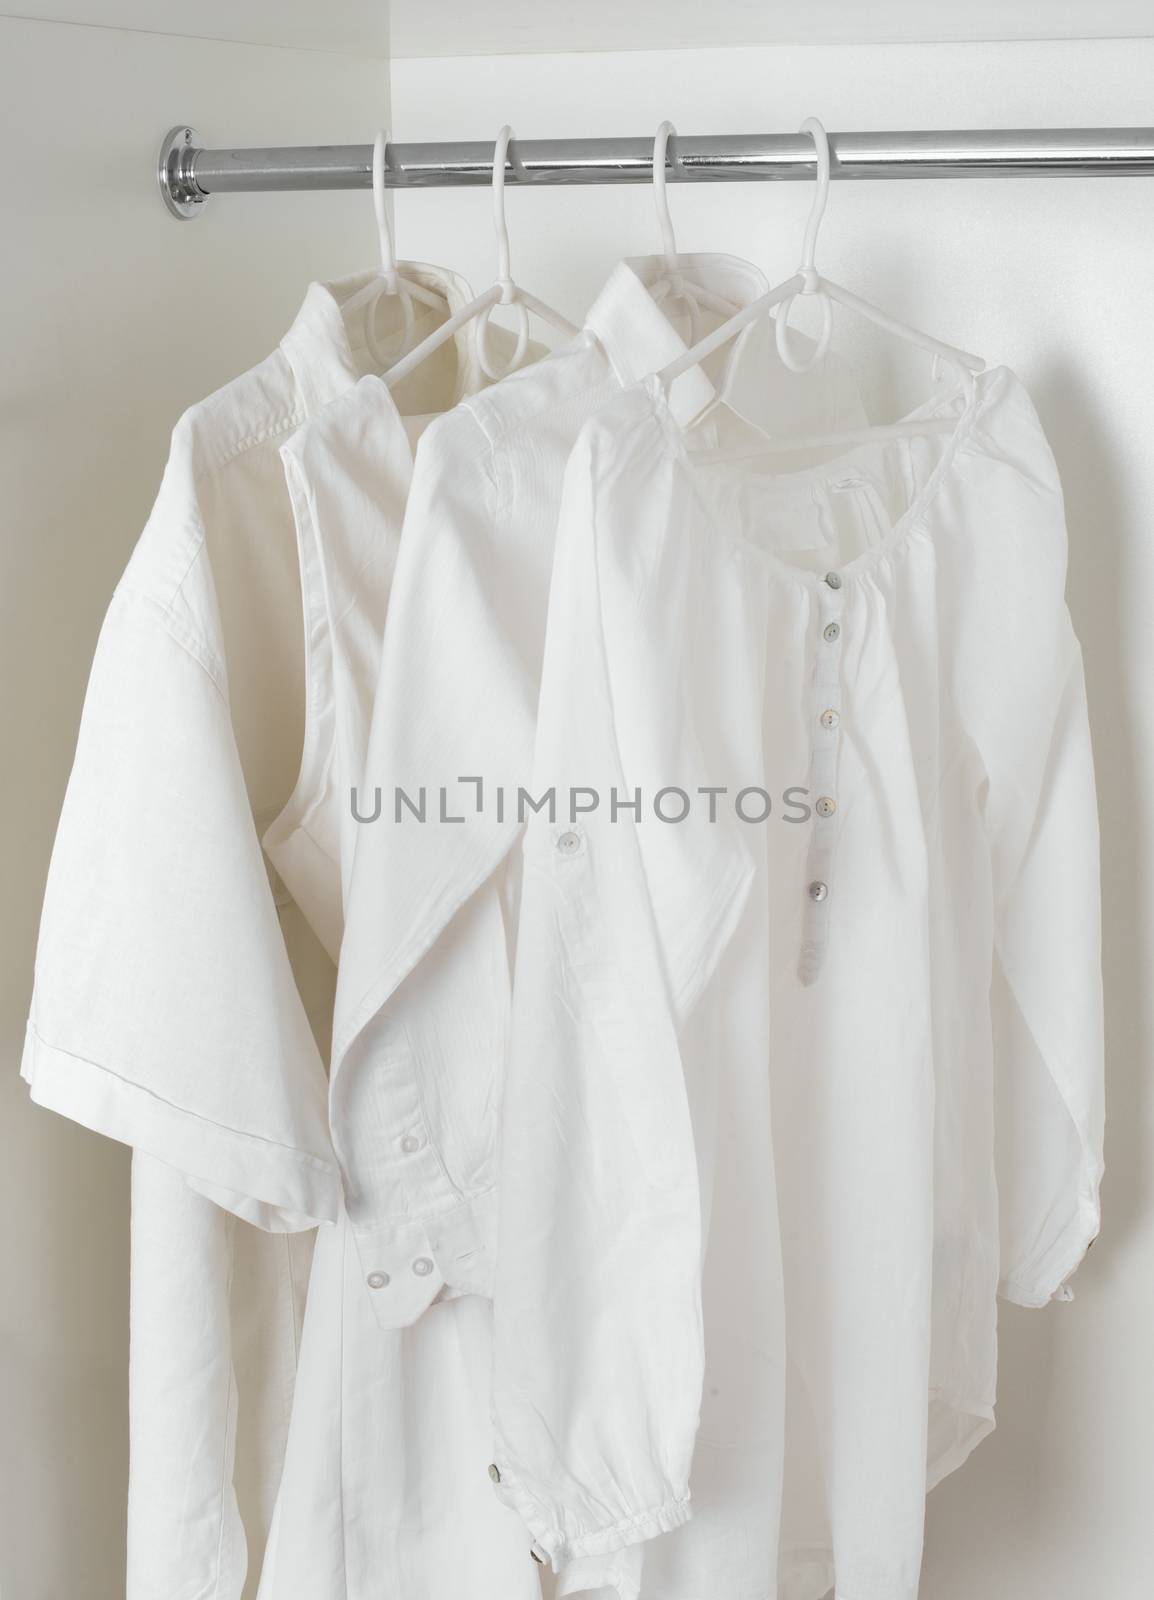 set of white clean ironed clothes hanging on hangers in a white cabinet